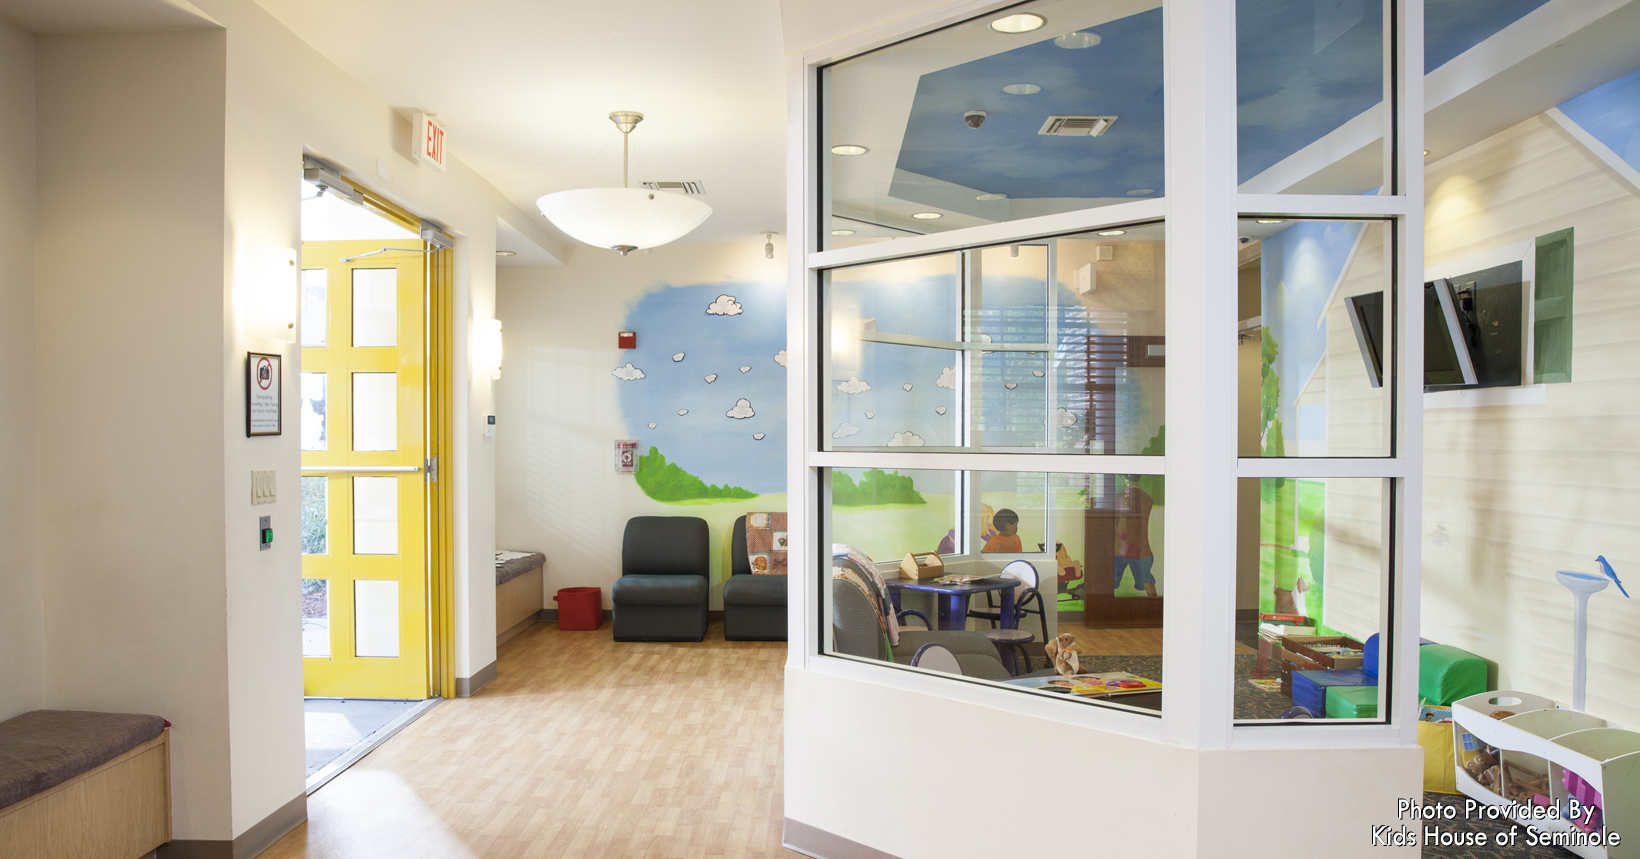 The front lobby to the Kids House. When children and families arrive to Kids House, the children are invited to read books, watch movies and have fun in the playroom. This allows the children to feel comfortable while they are visiting.